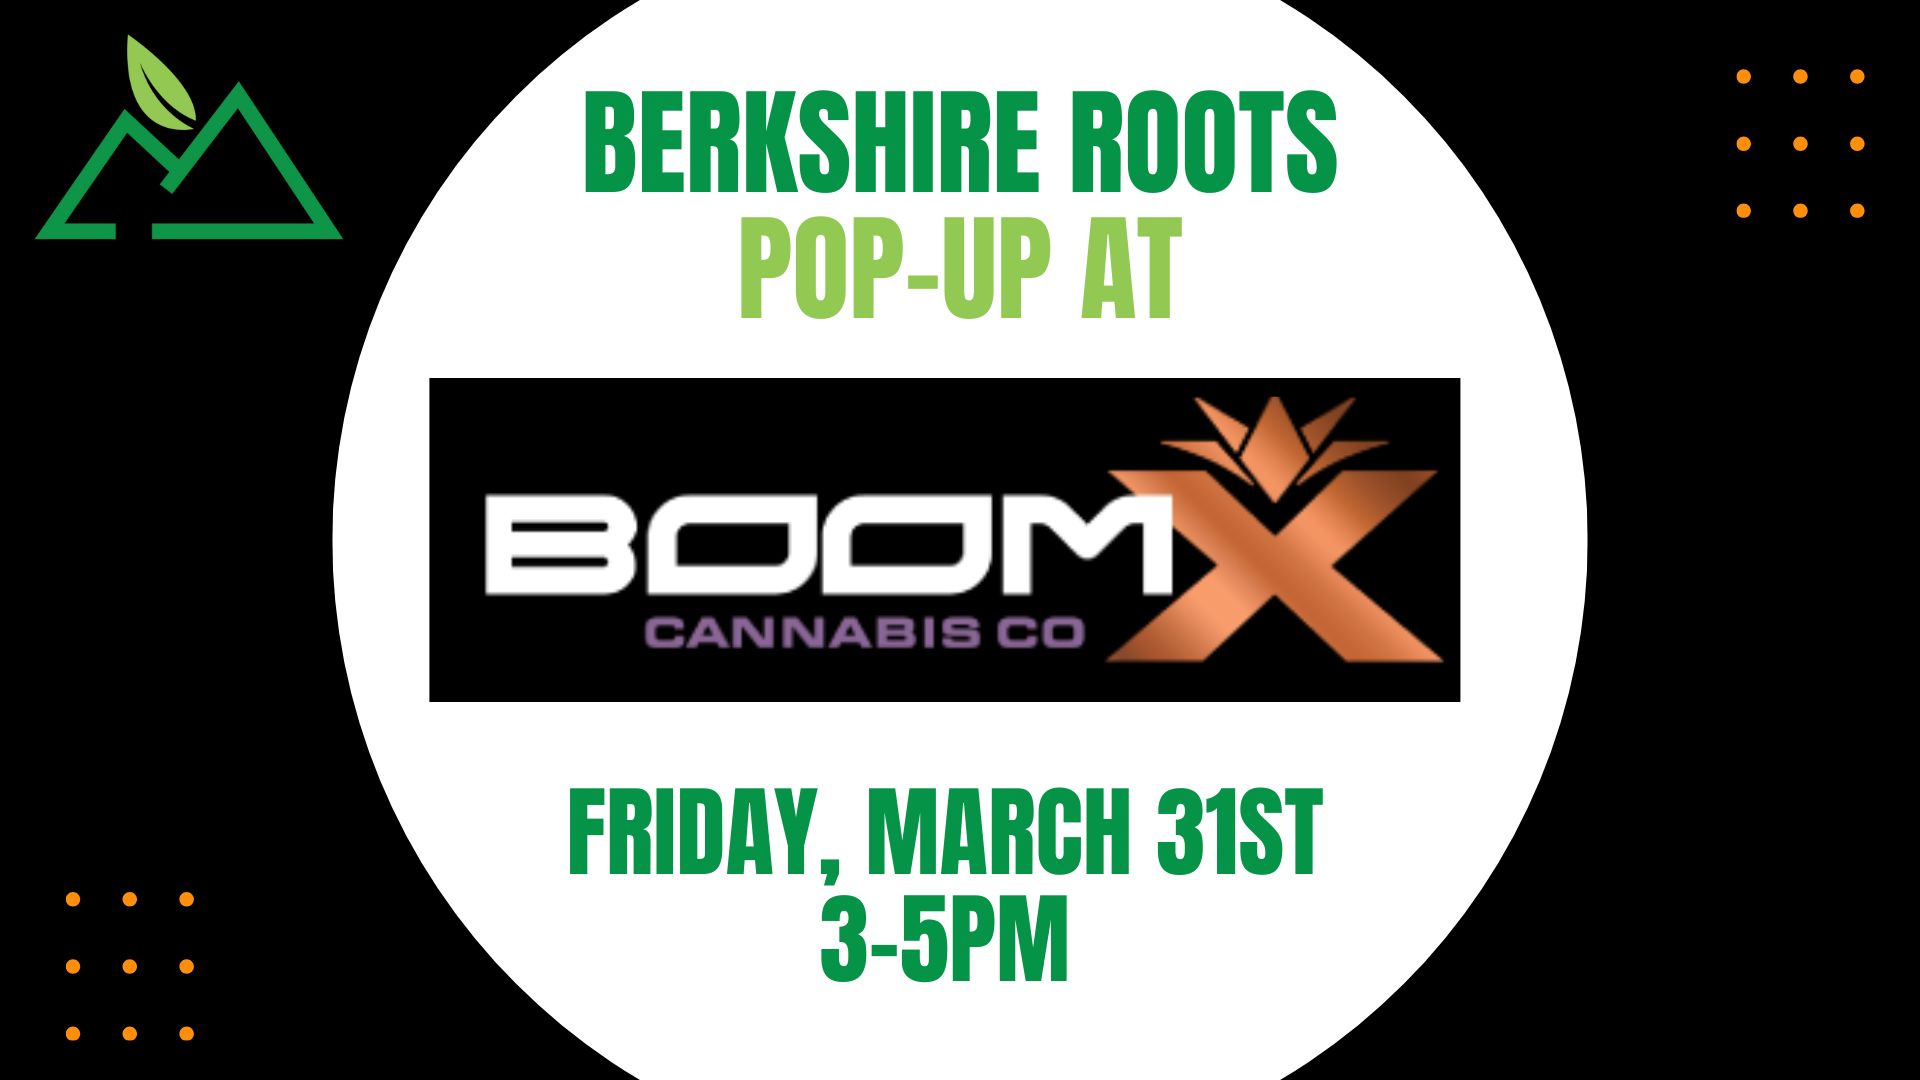 Berkshire Roots pop up at BoomX Cannabis Co.